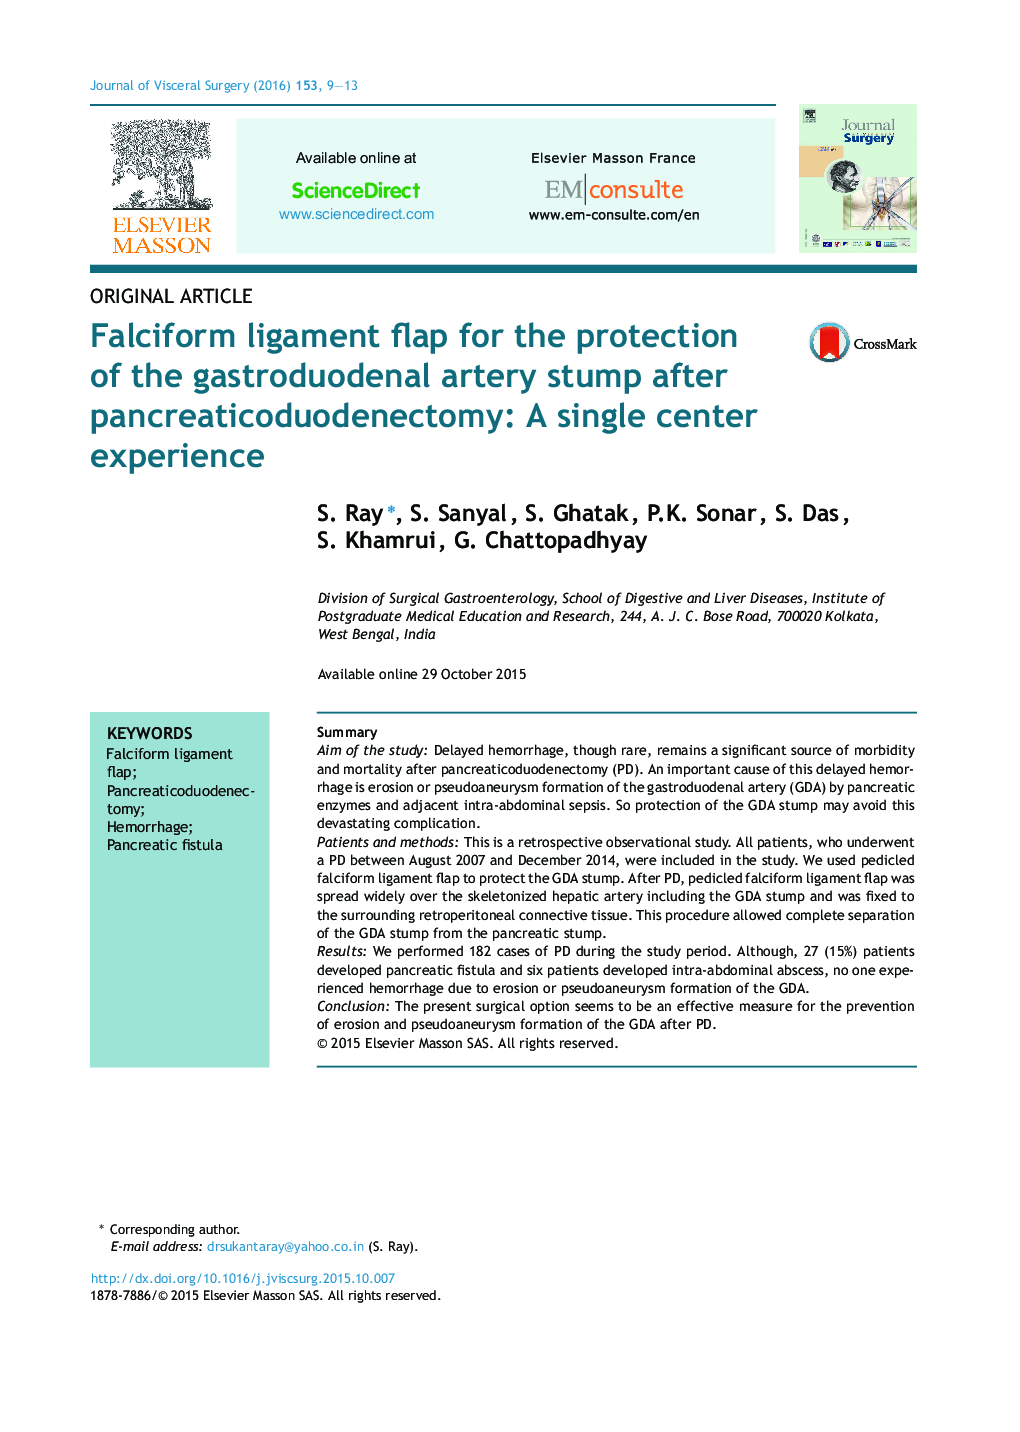 Falciform ligament flap for the protection of the gastroduodenal artery stump after pancreaticoduodenectomy: A single center experience